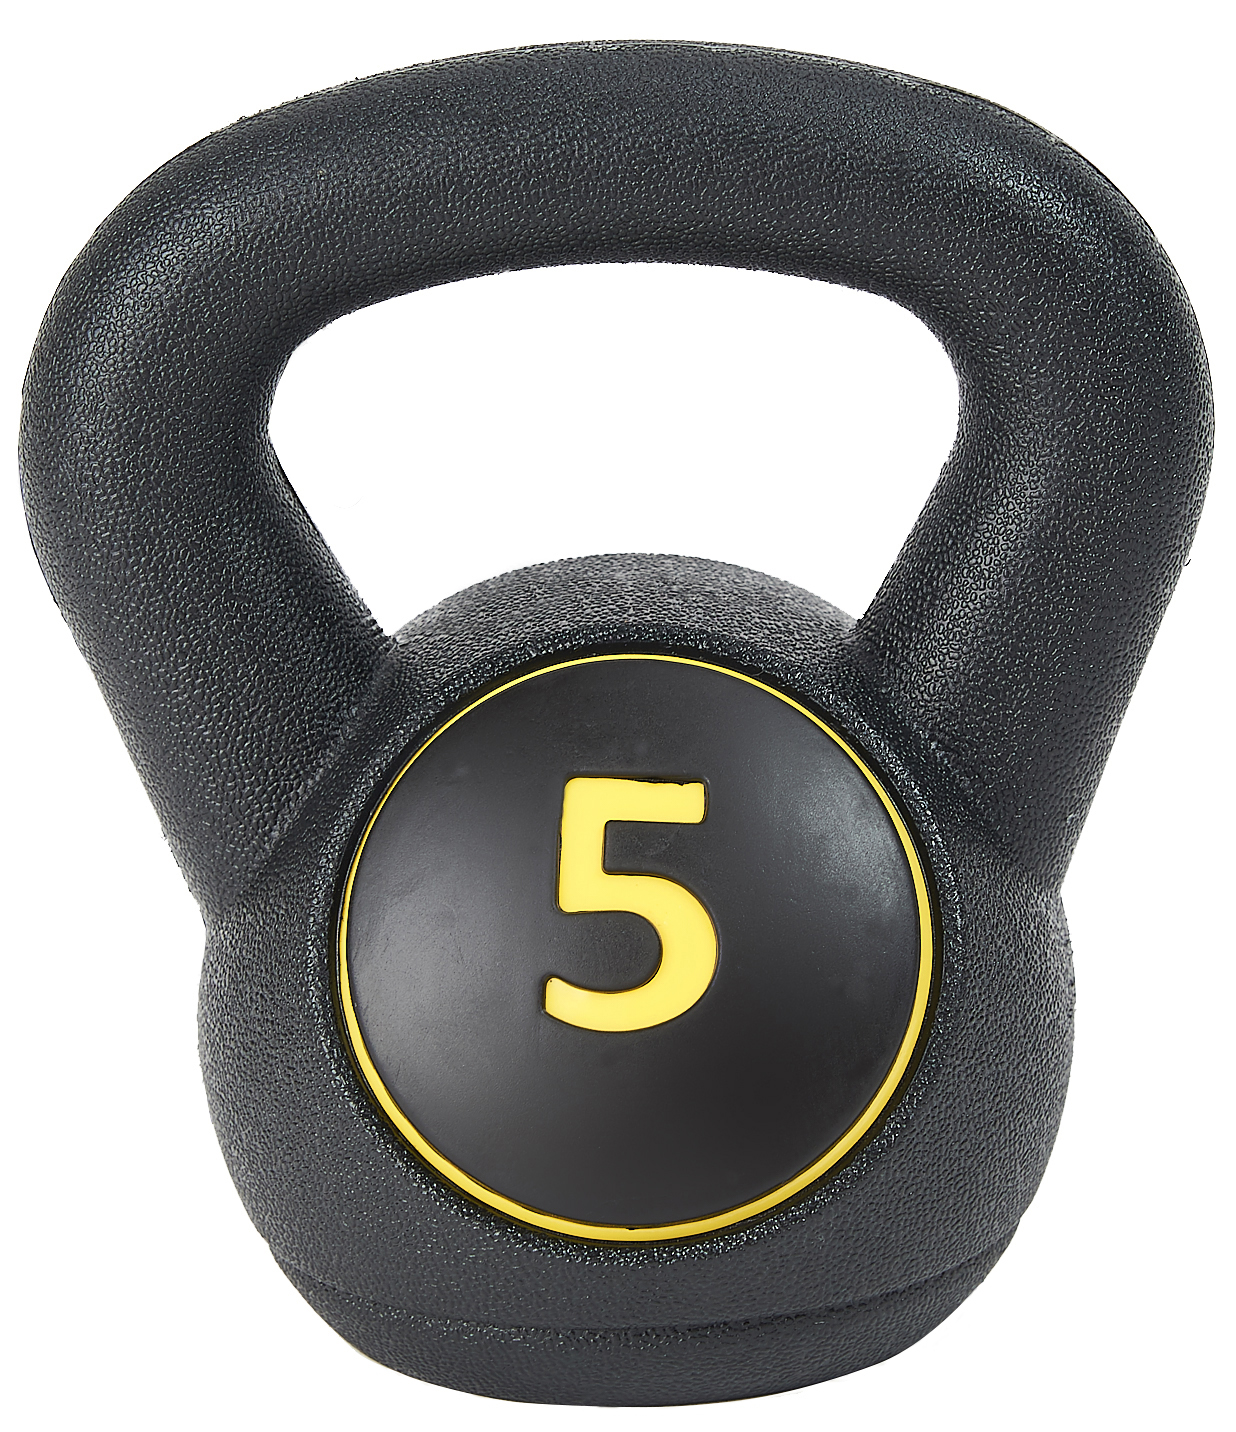 BalanceFrom Wide Grip Kettlebell Exercise Fitness Weight Set, 3-Pieces: 5lb, 10lb, and 15lb Kettlebells - image 4 of 6